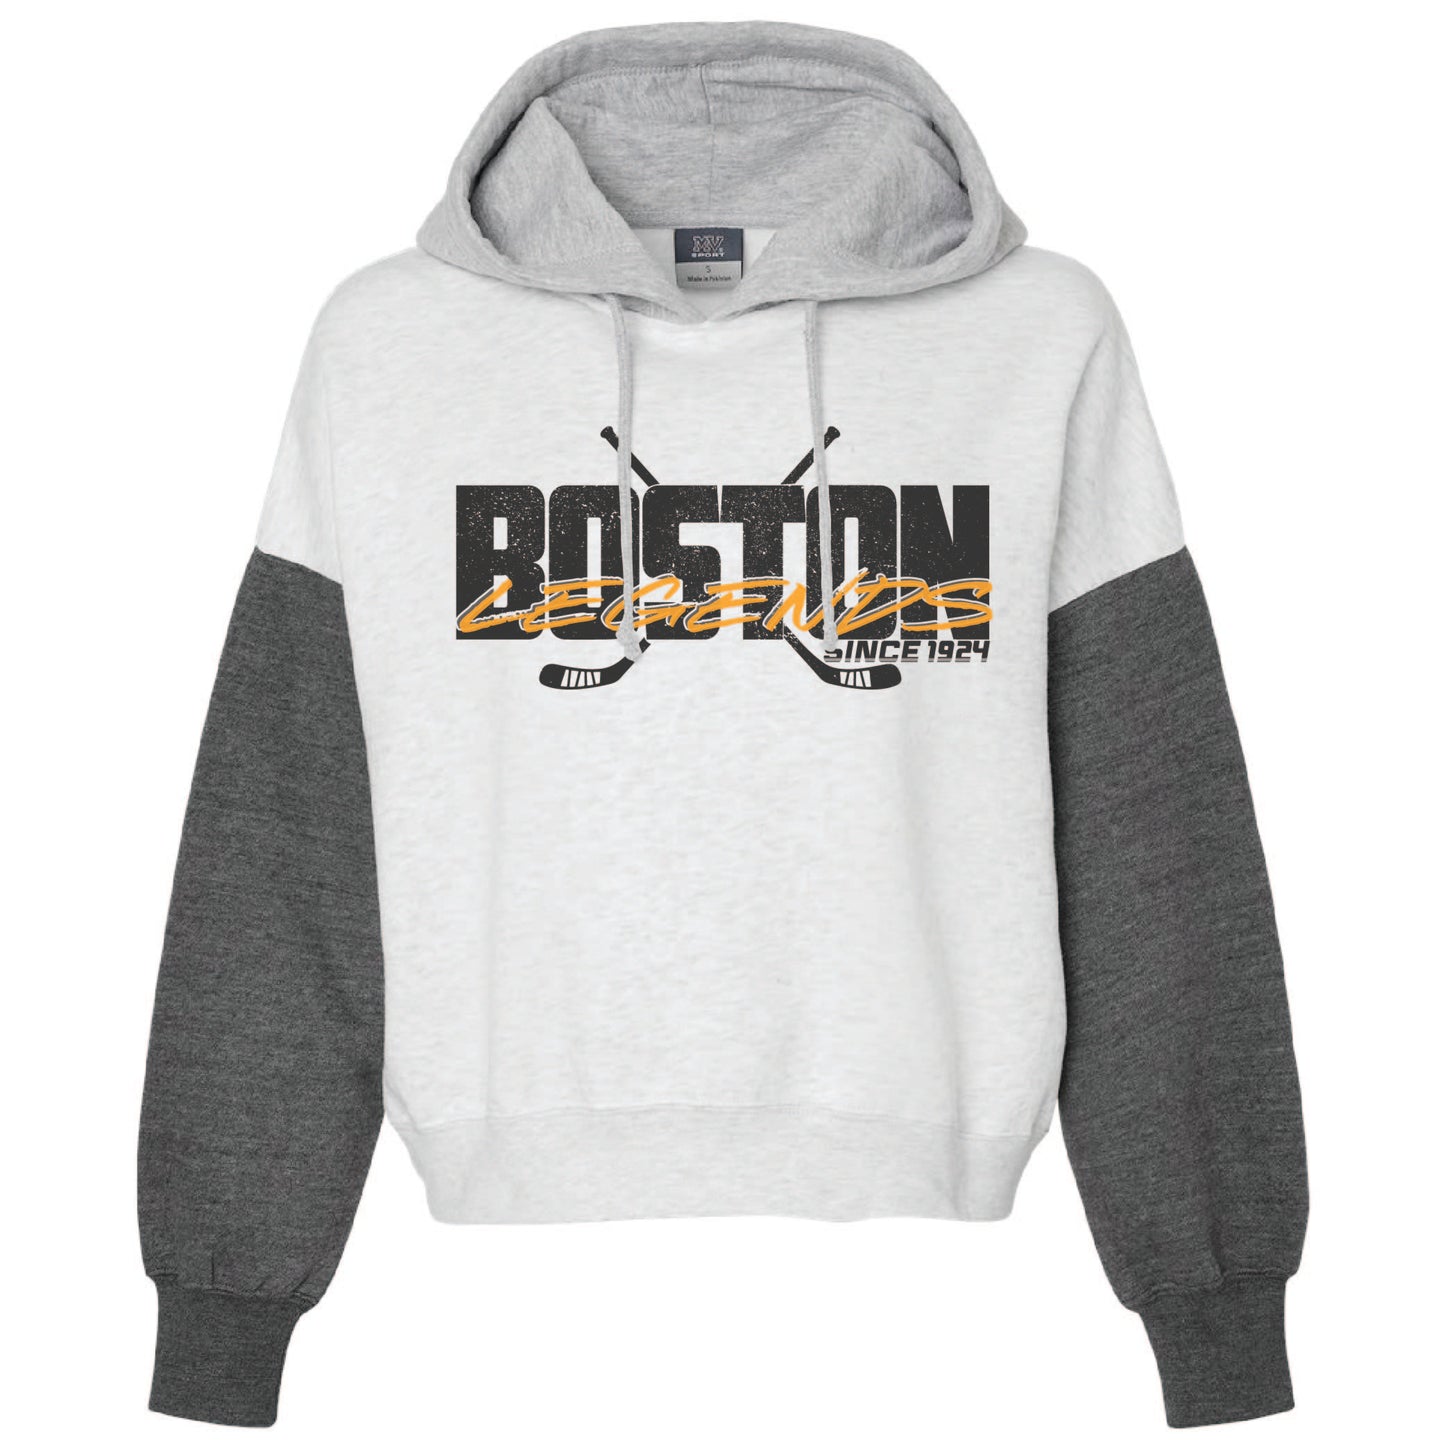 LIMITED EDITION - Legends of Boston Women's Colorblock Hoodie